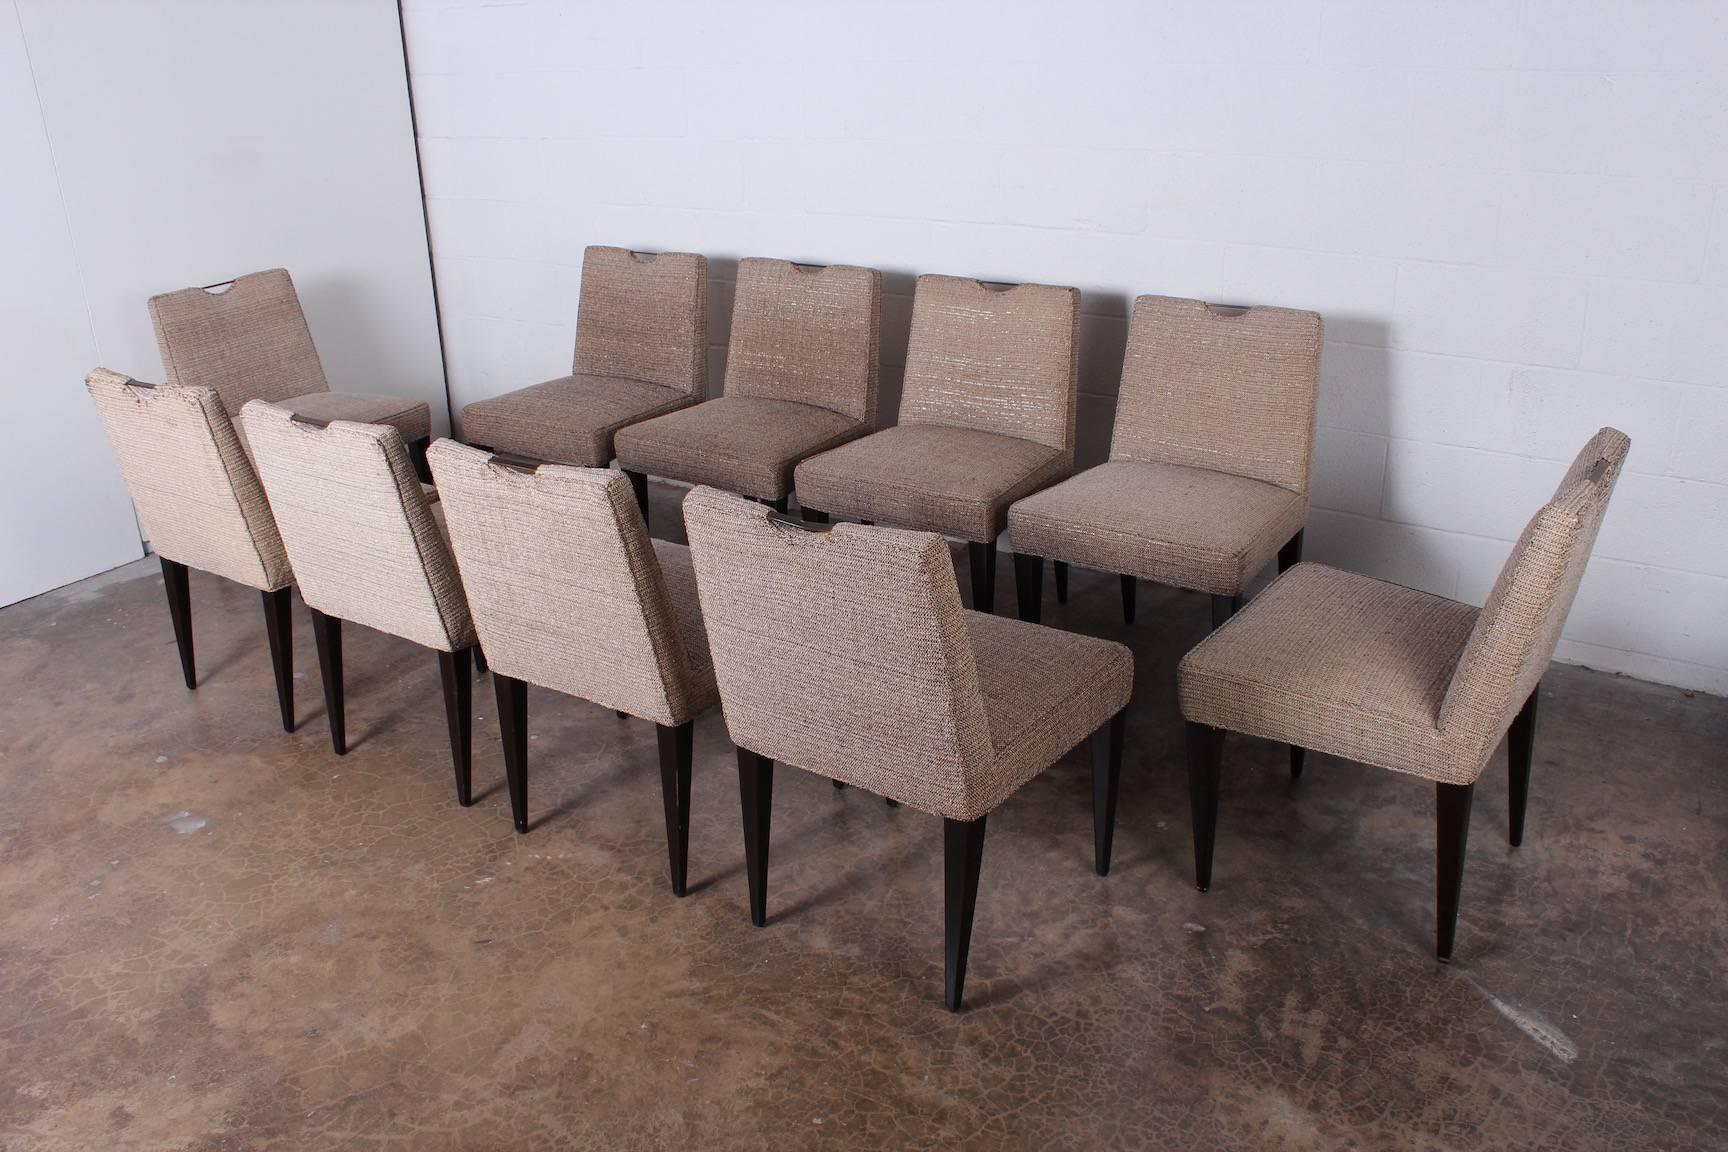 Set of Ten Dining Chairs by Edward Wormley for Dunbar 1